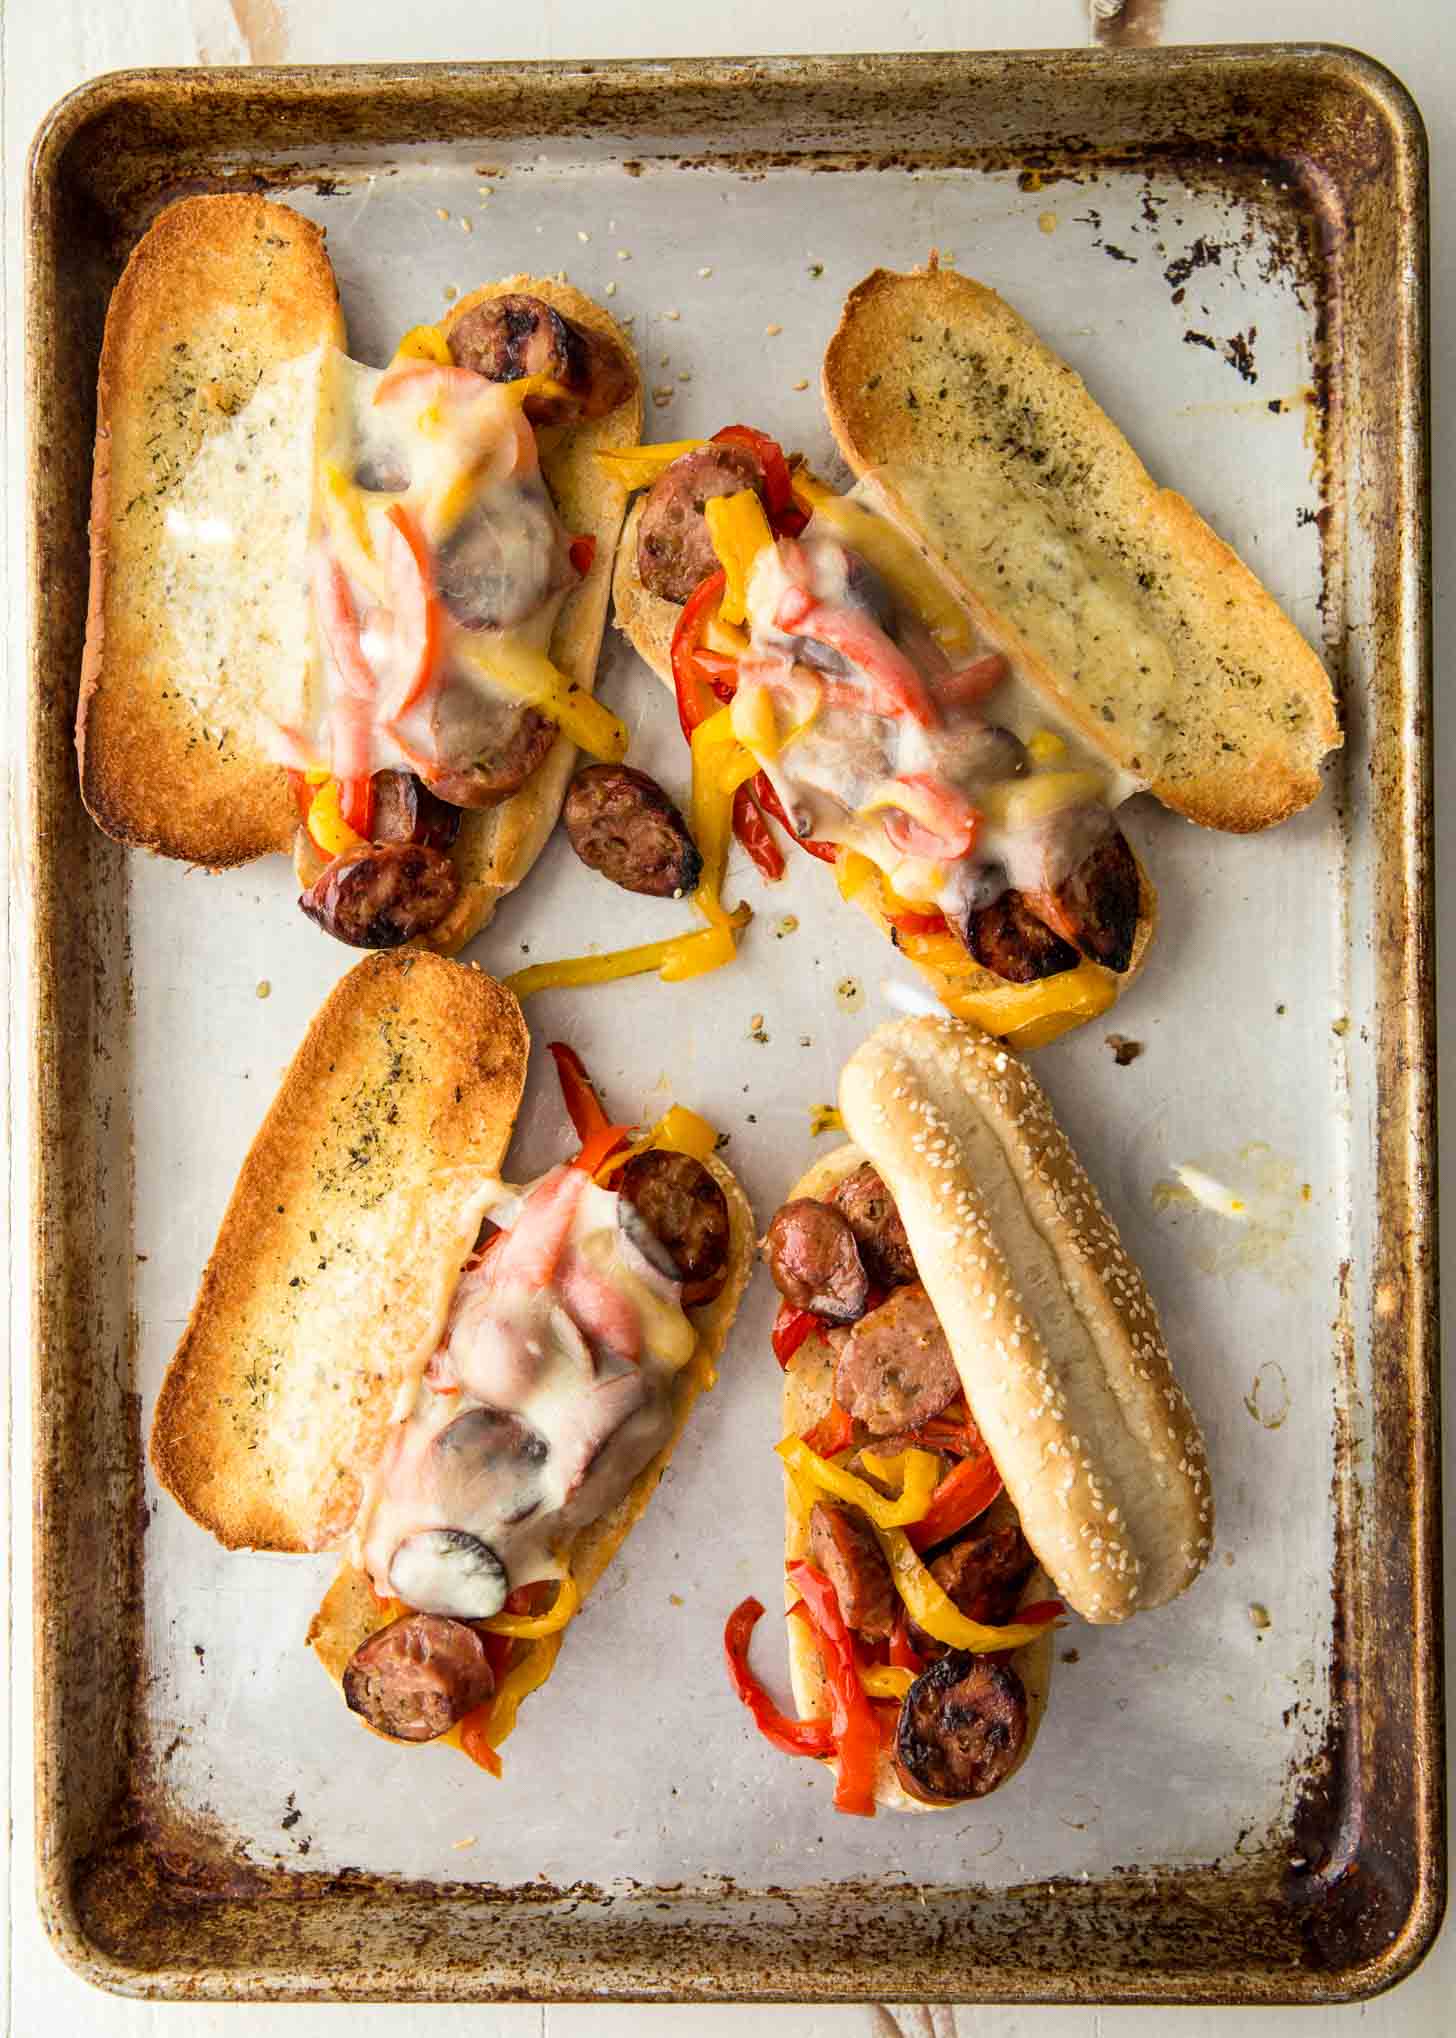 sausage and peppers on buns and topped with cheese